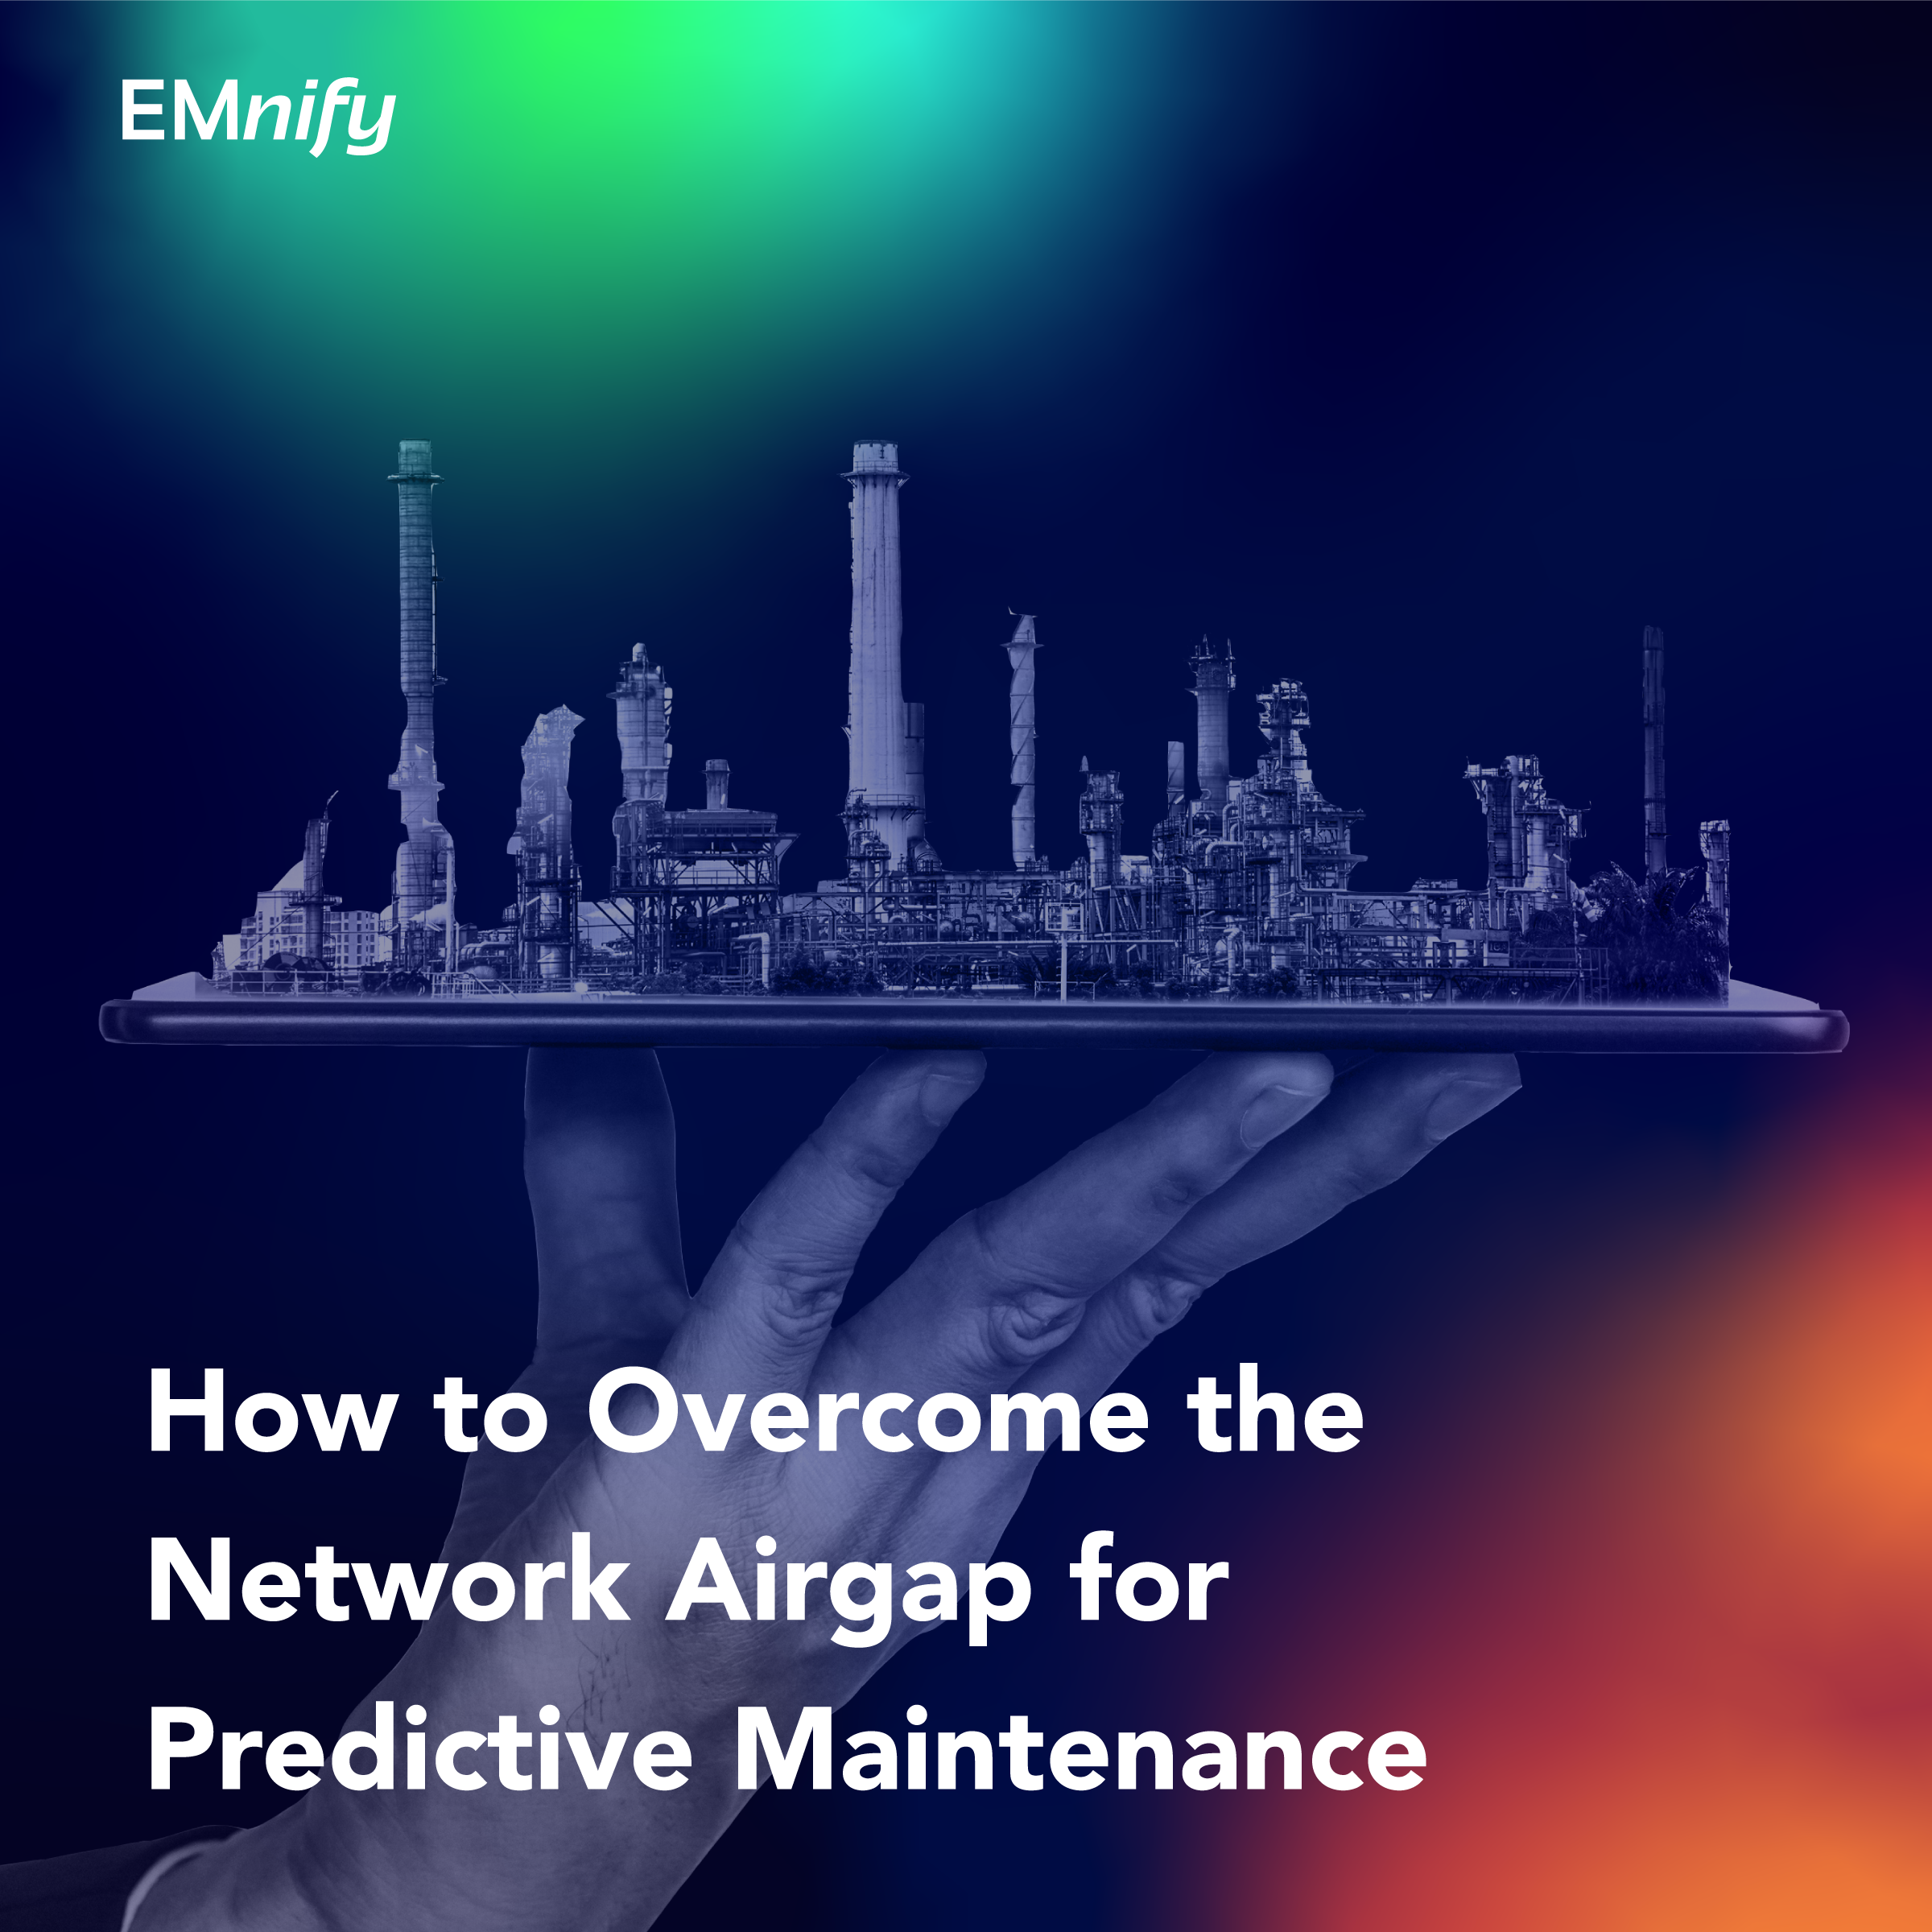 Image for post How to Overcome the Network Airgap for Predictive Maintenance